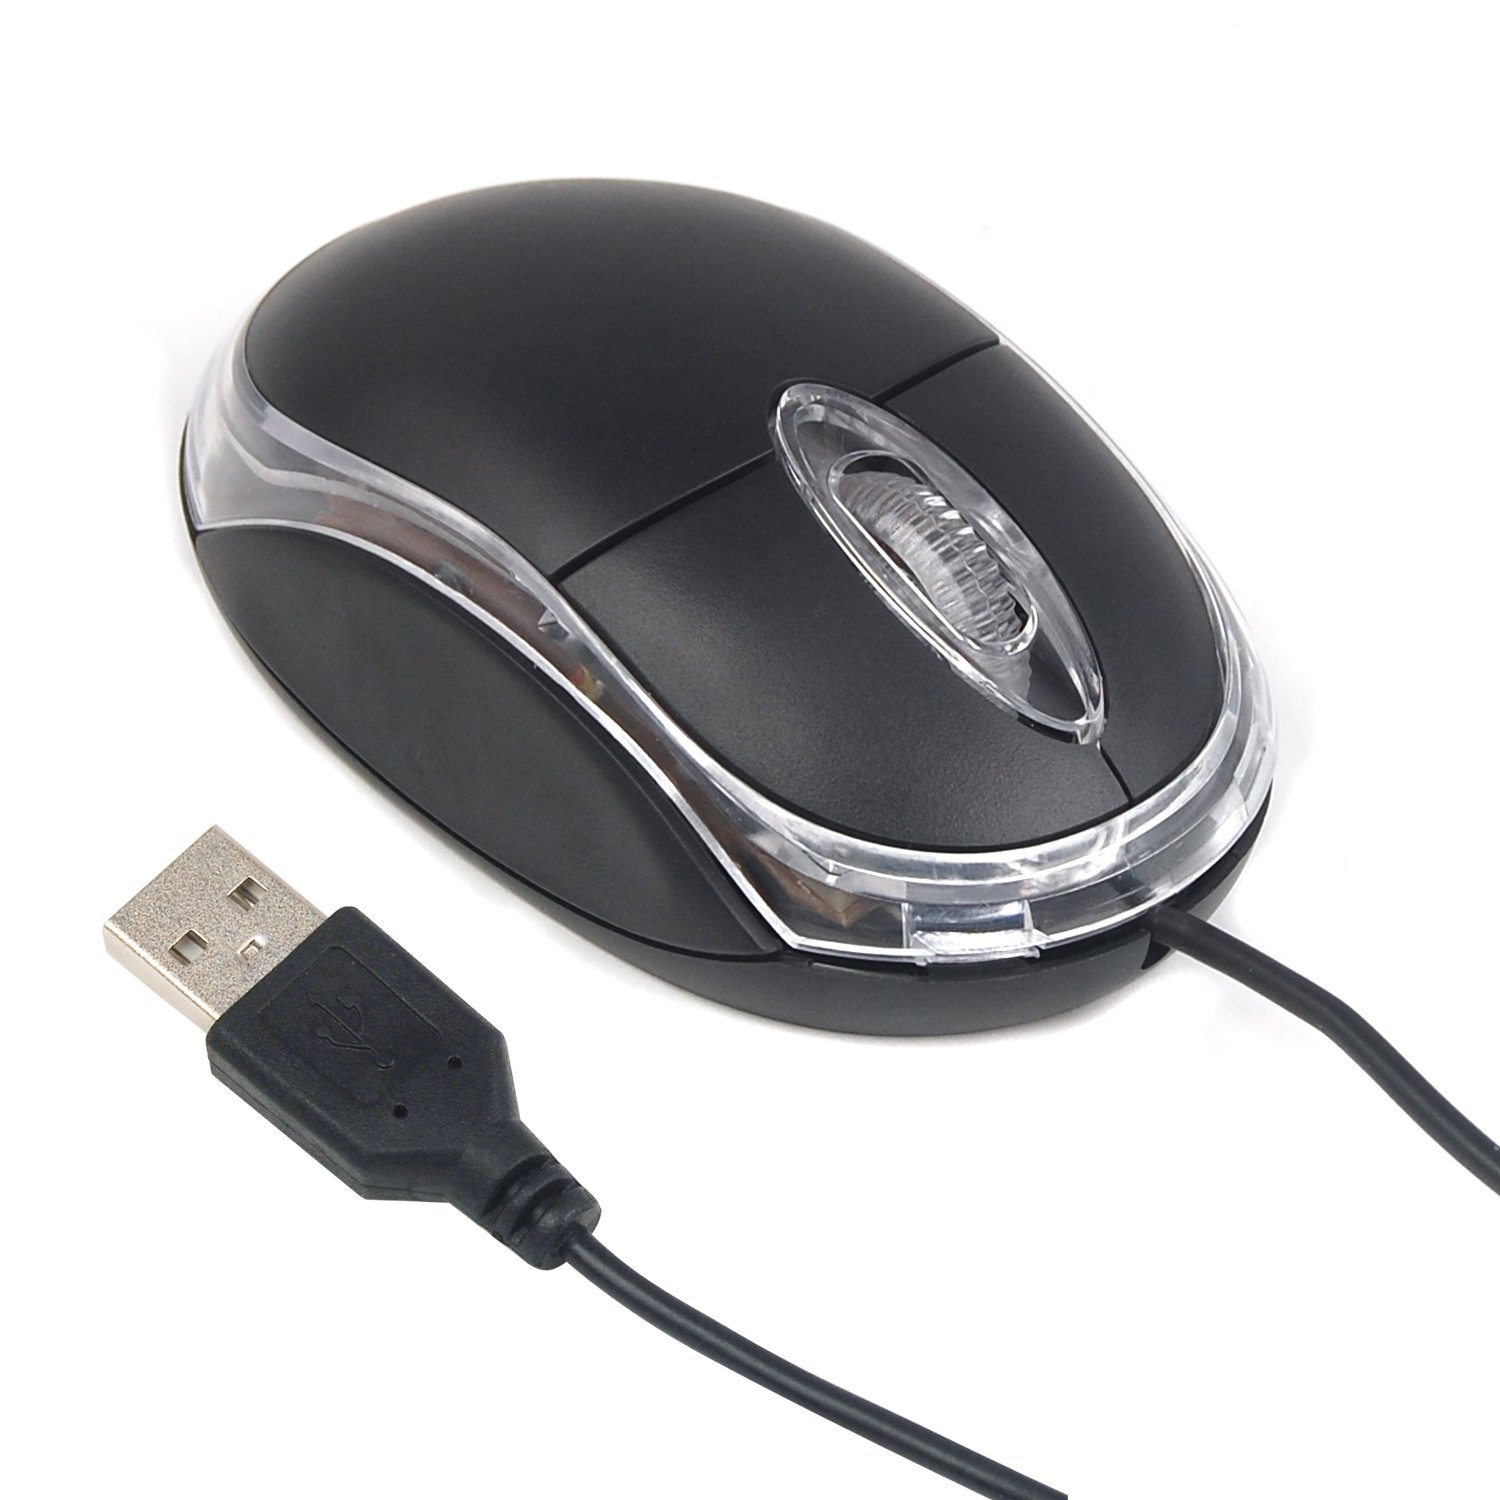 generic usb optical mouse driver